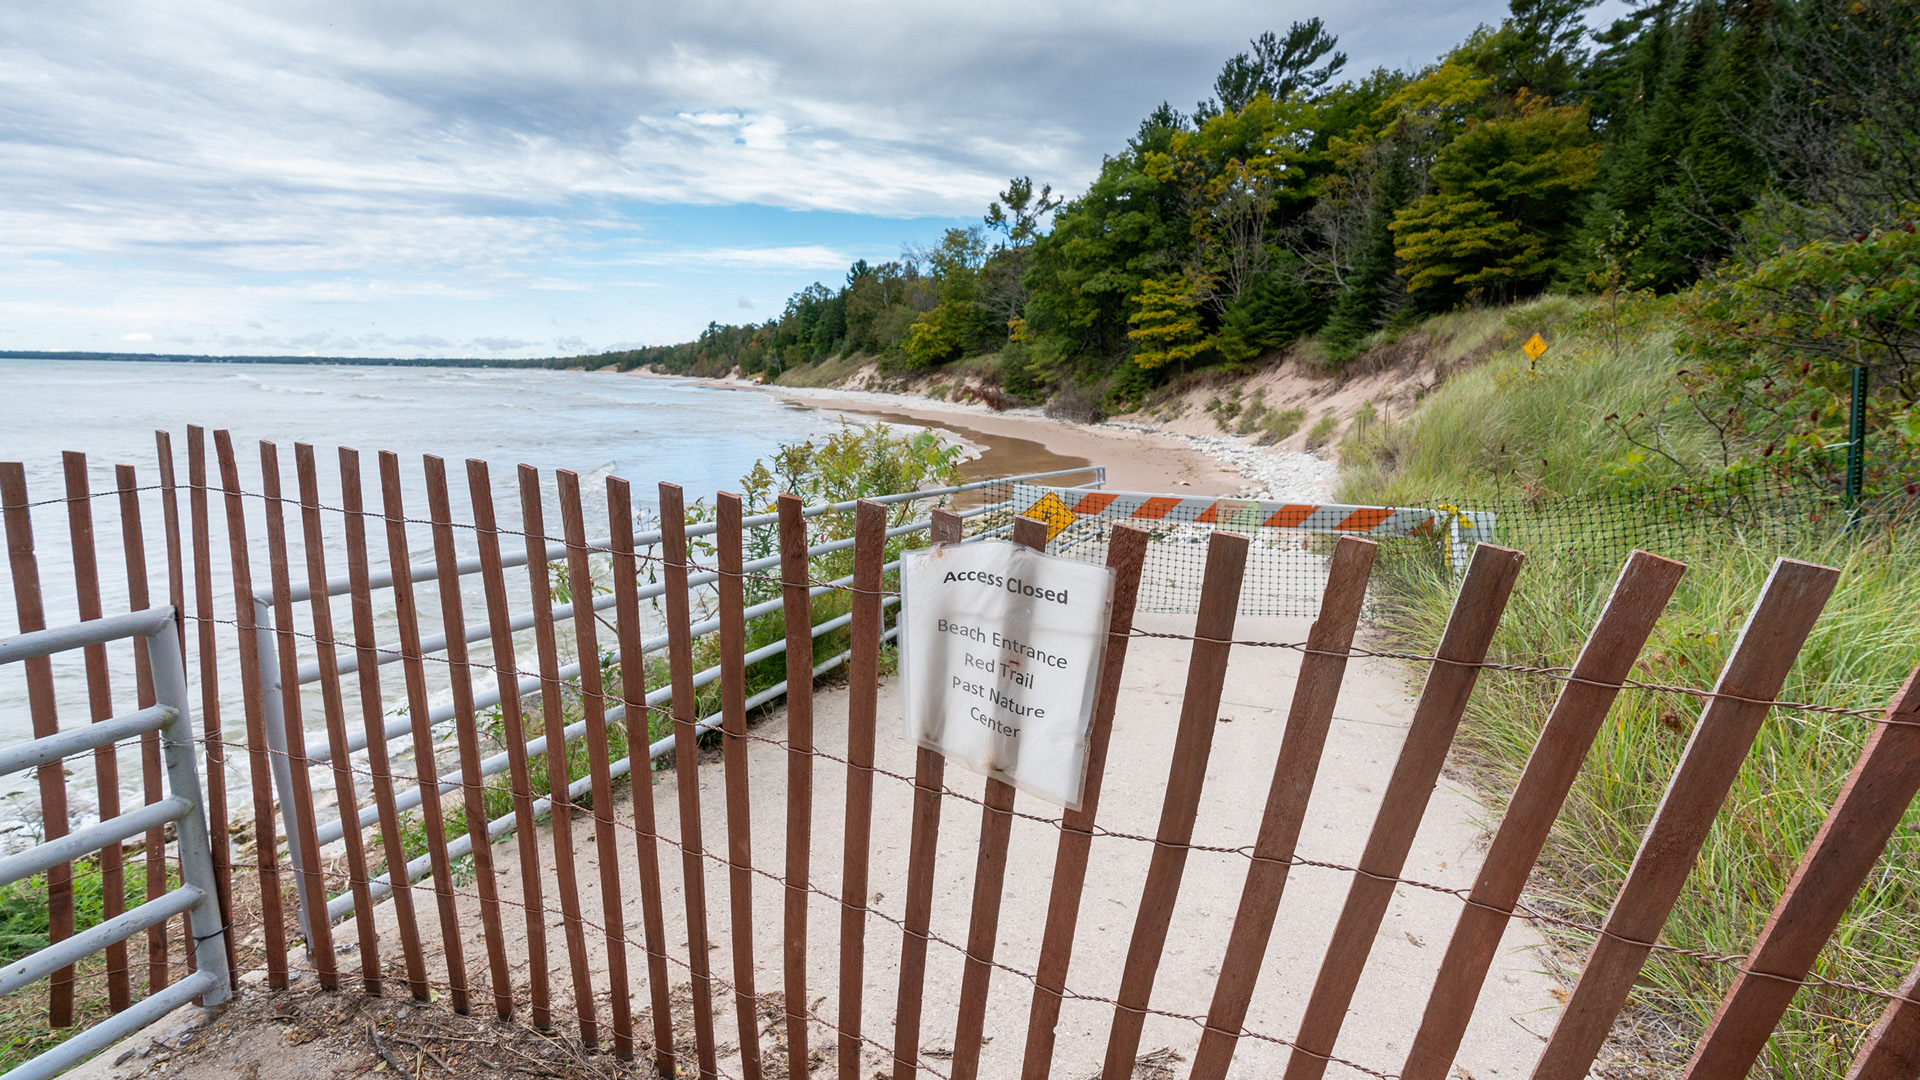 A snow fence with a sign reading "Access Closed, Beach Entrance, Red Trail, Past Nature Center" in front of a sandy slope down to a lakeshore with eroded sandy dunes covered with grass and trees farther inland.